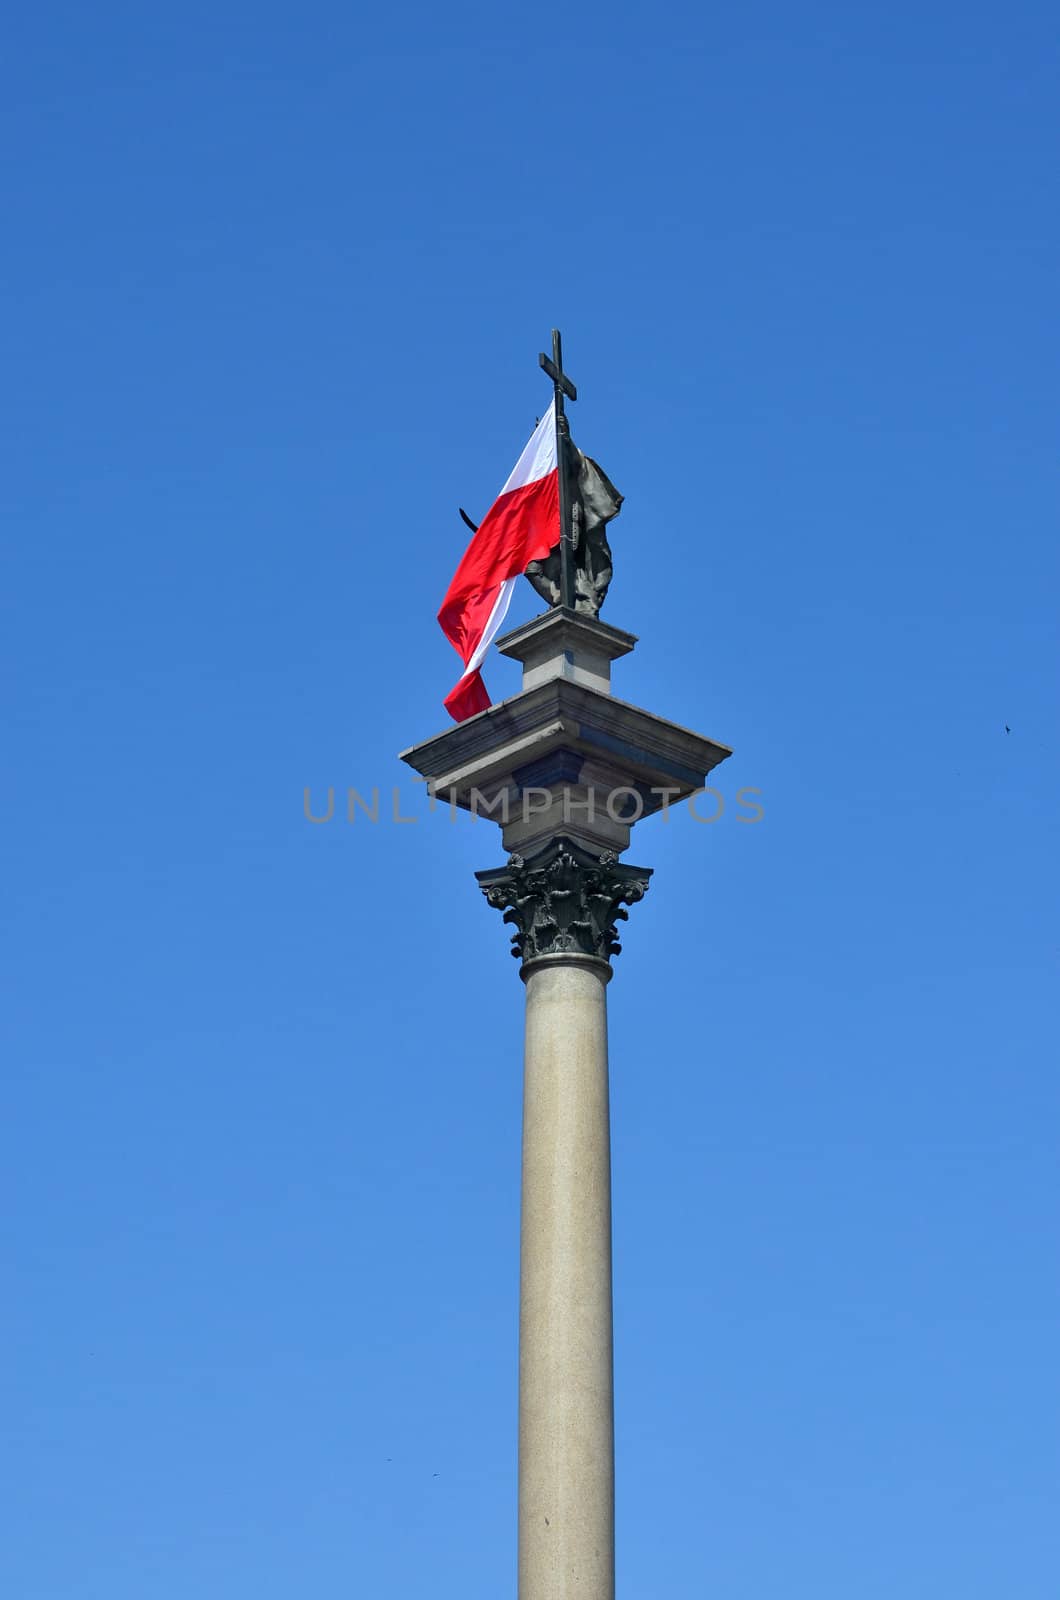 Constitution Day in Poland. King monument in Warsaw is decorated with polish flag